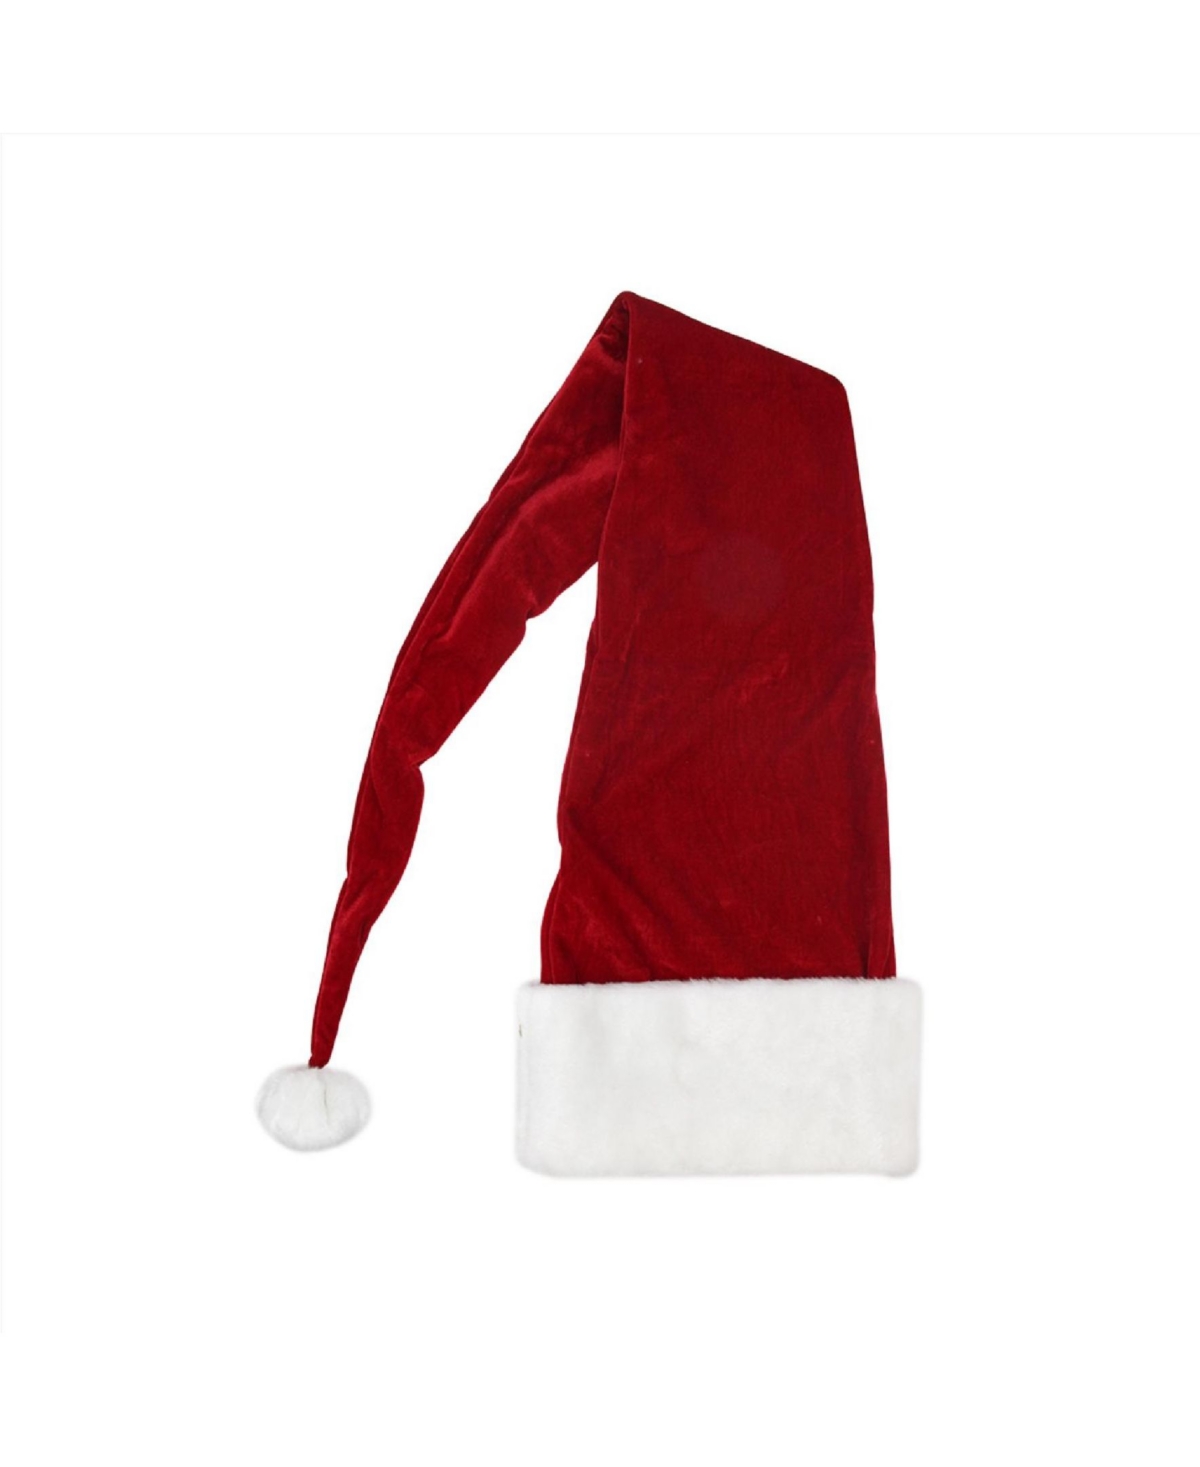 Santa Unisex Adult Christmas Hat Costume Accessory-One Size - Red